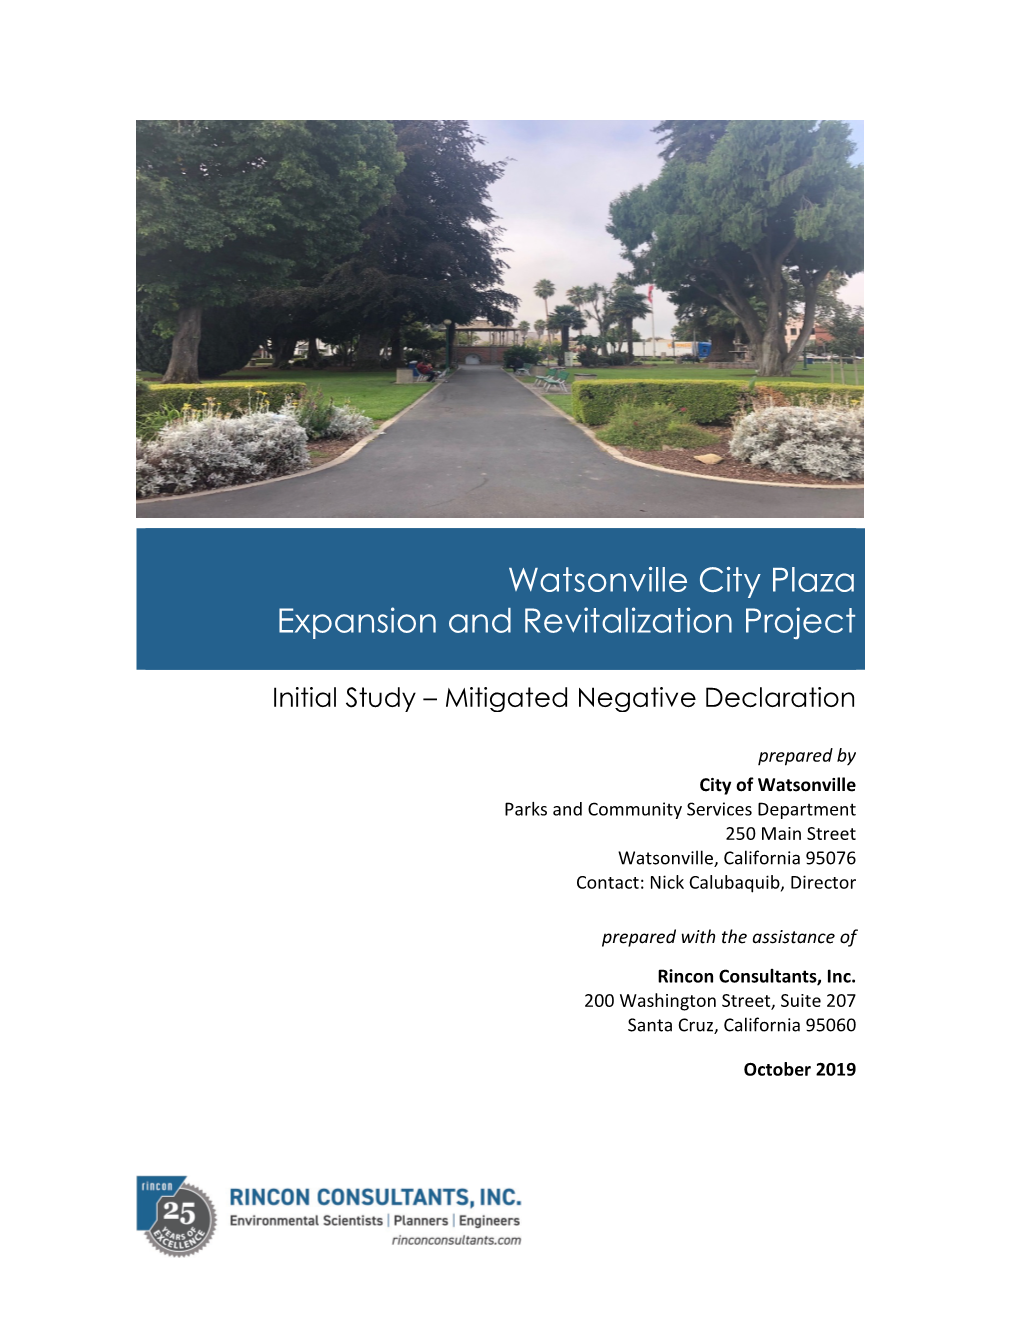 Watsonville City Plaza Expansion and Revitalization Project